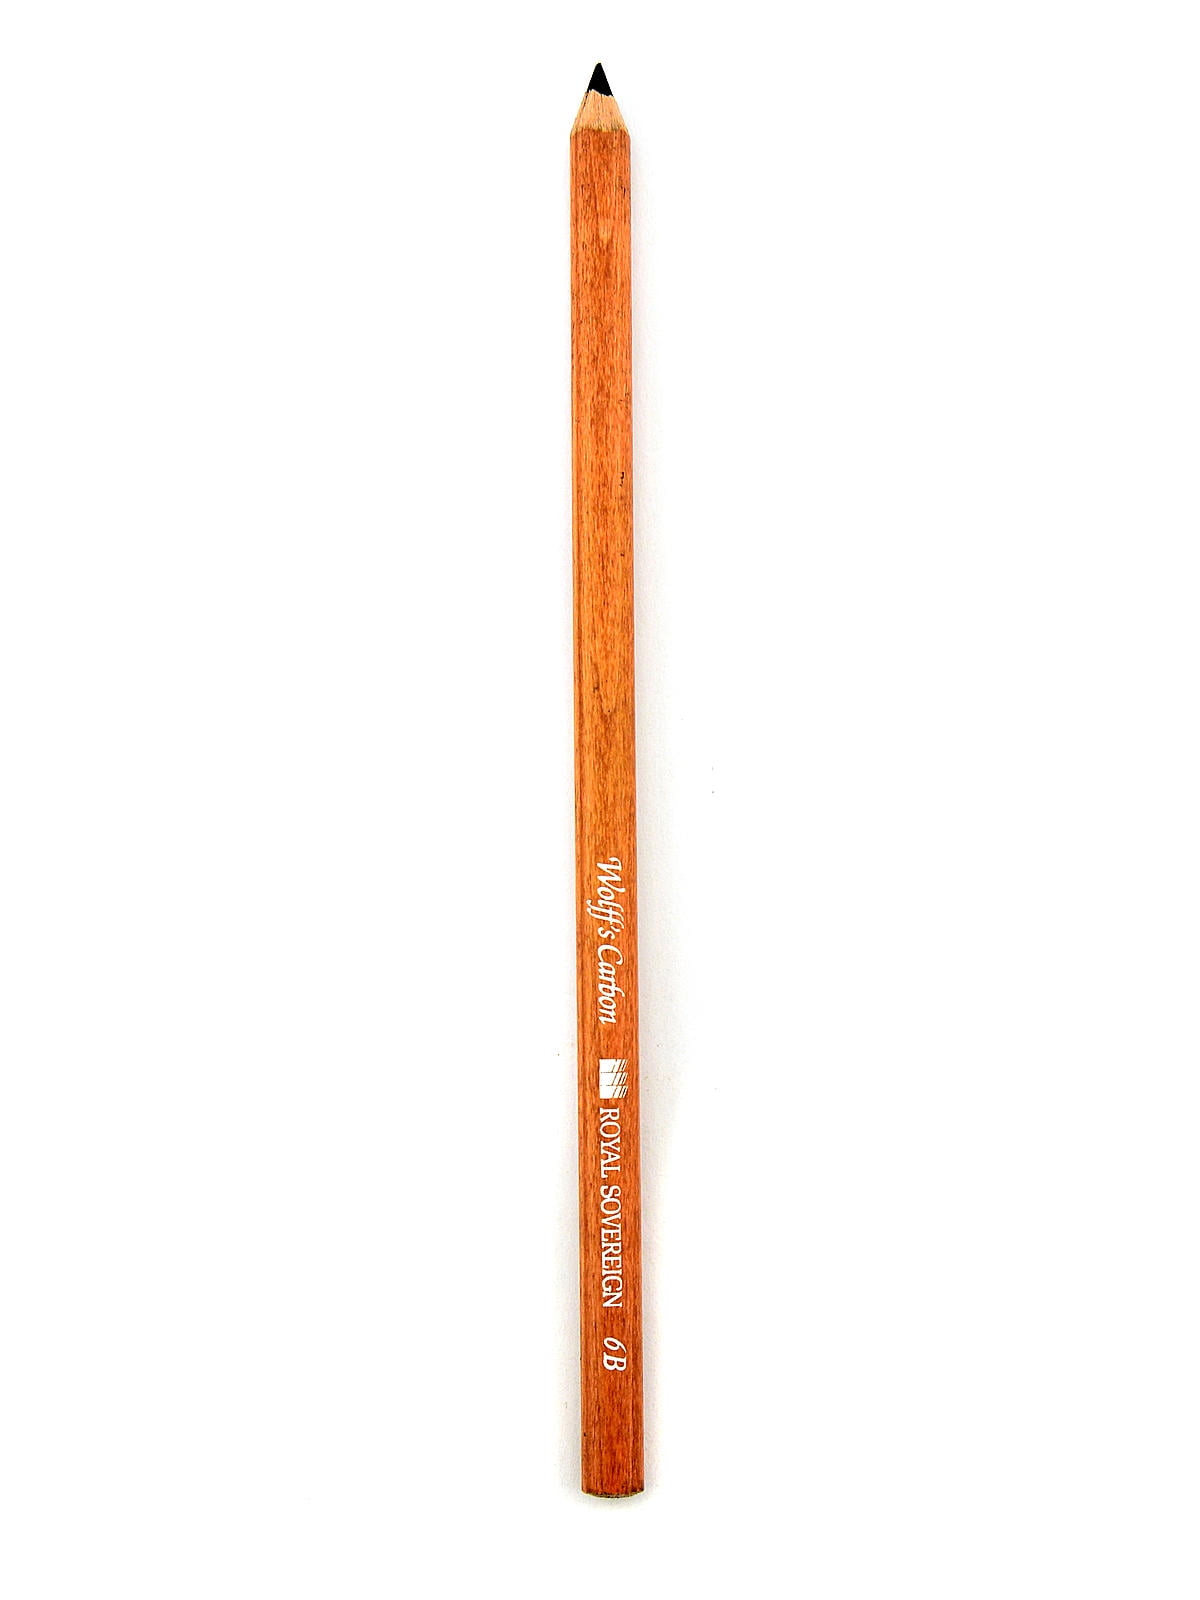 Carbon Pencil 6B, each (pack of 12) 